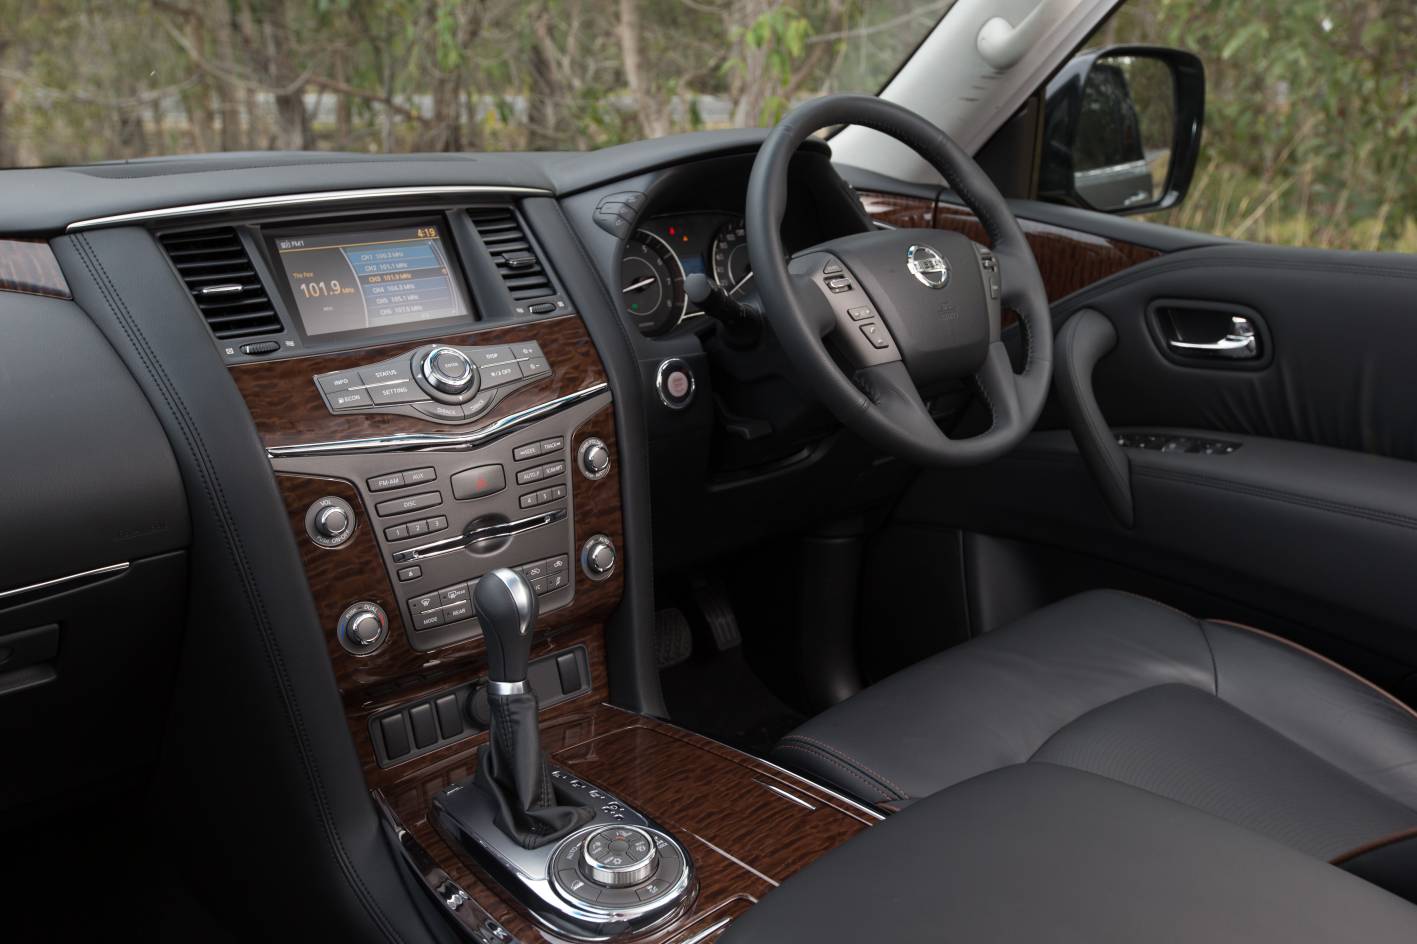 The new Nissan Patrol V8 models offer a fresh new interior design that provide gorgeous detailing and materials, particularly the Ti-L model.